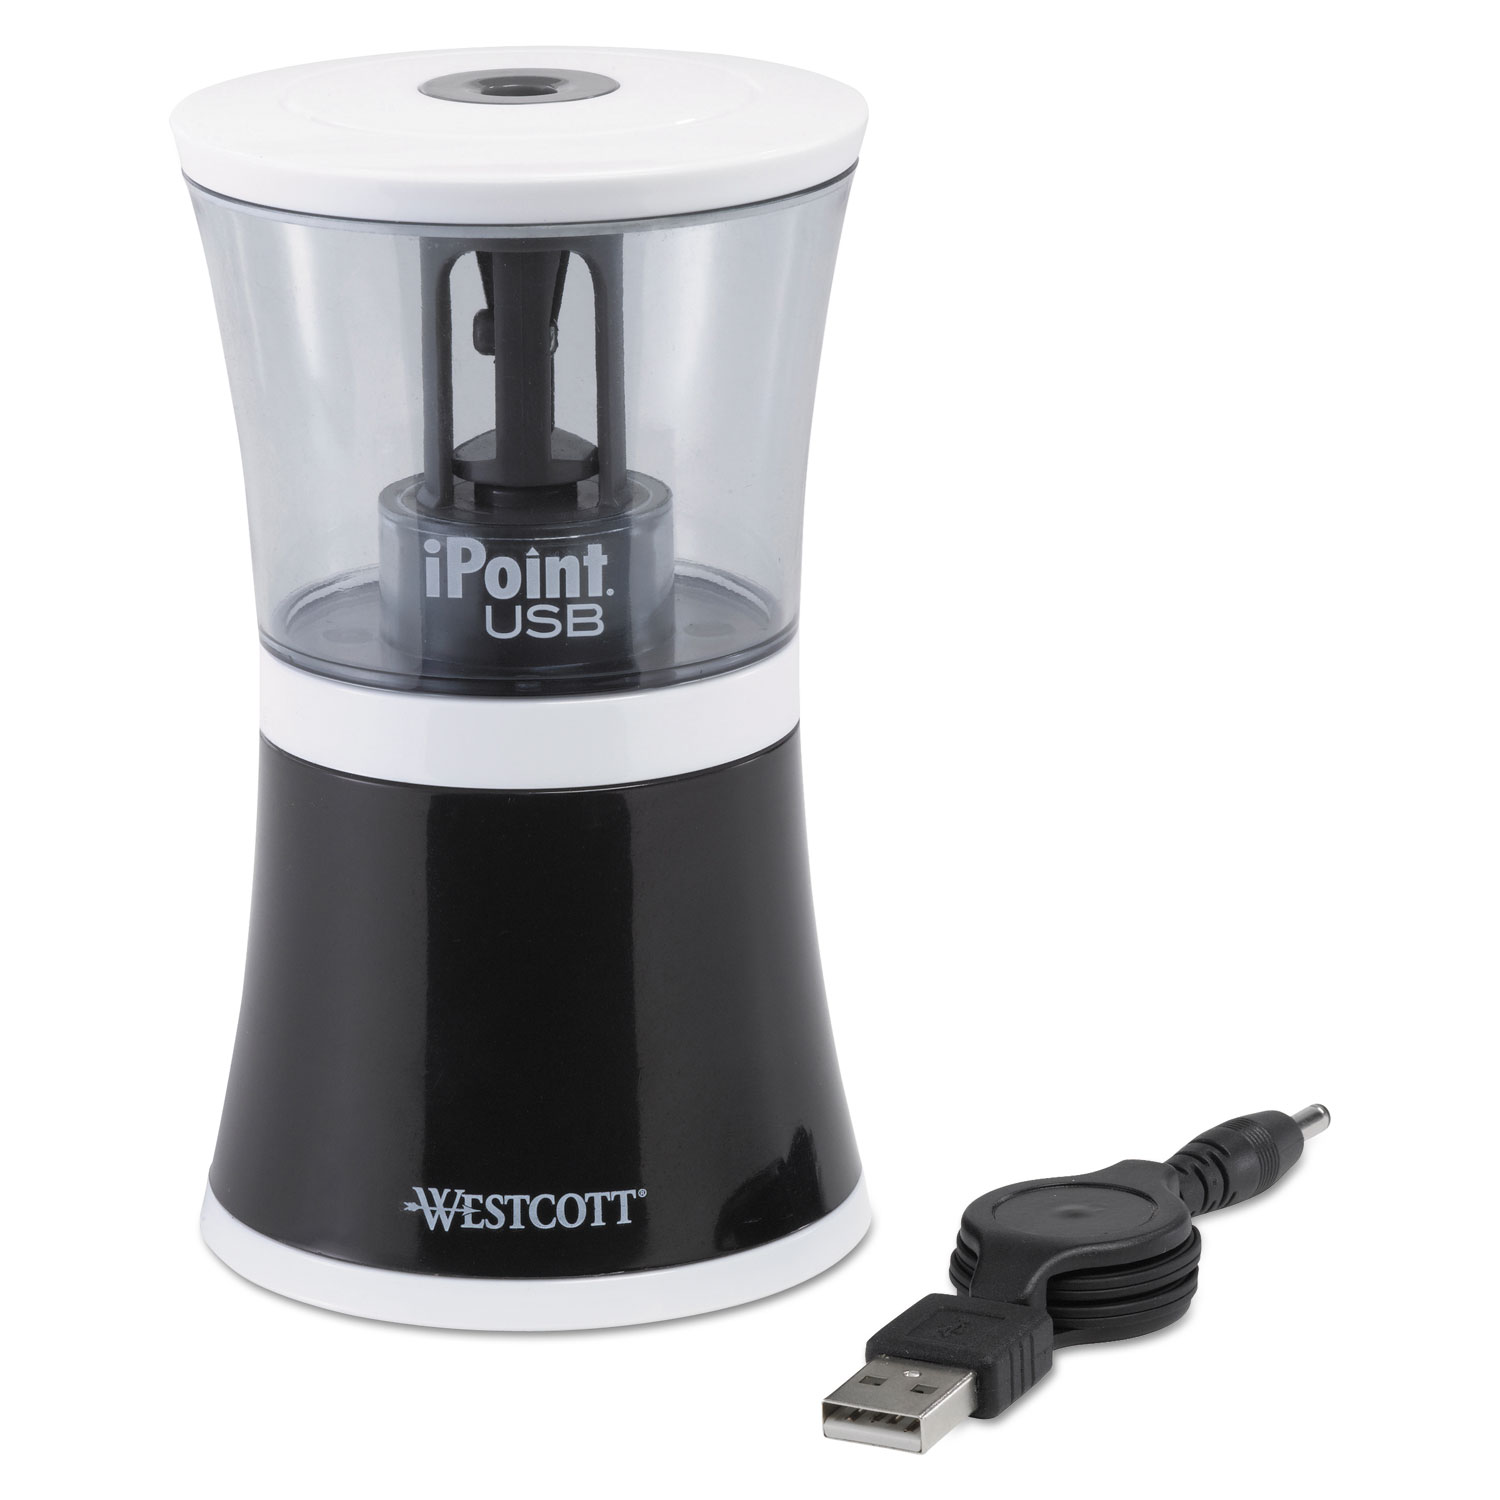  Westcott 15912 iPoint USB/Battery Operated Pencil Sharpener, Battery-Powered, 5.88 x 3.13 x 8.5, Black (ACM15912) 